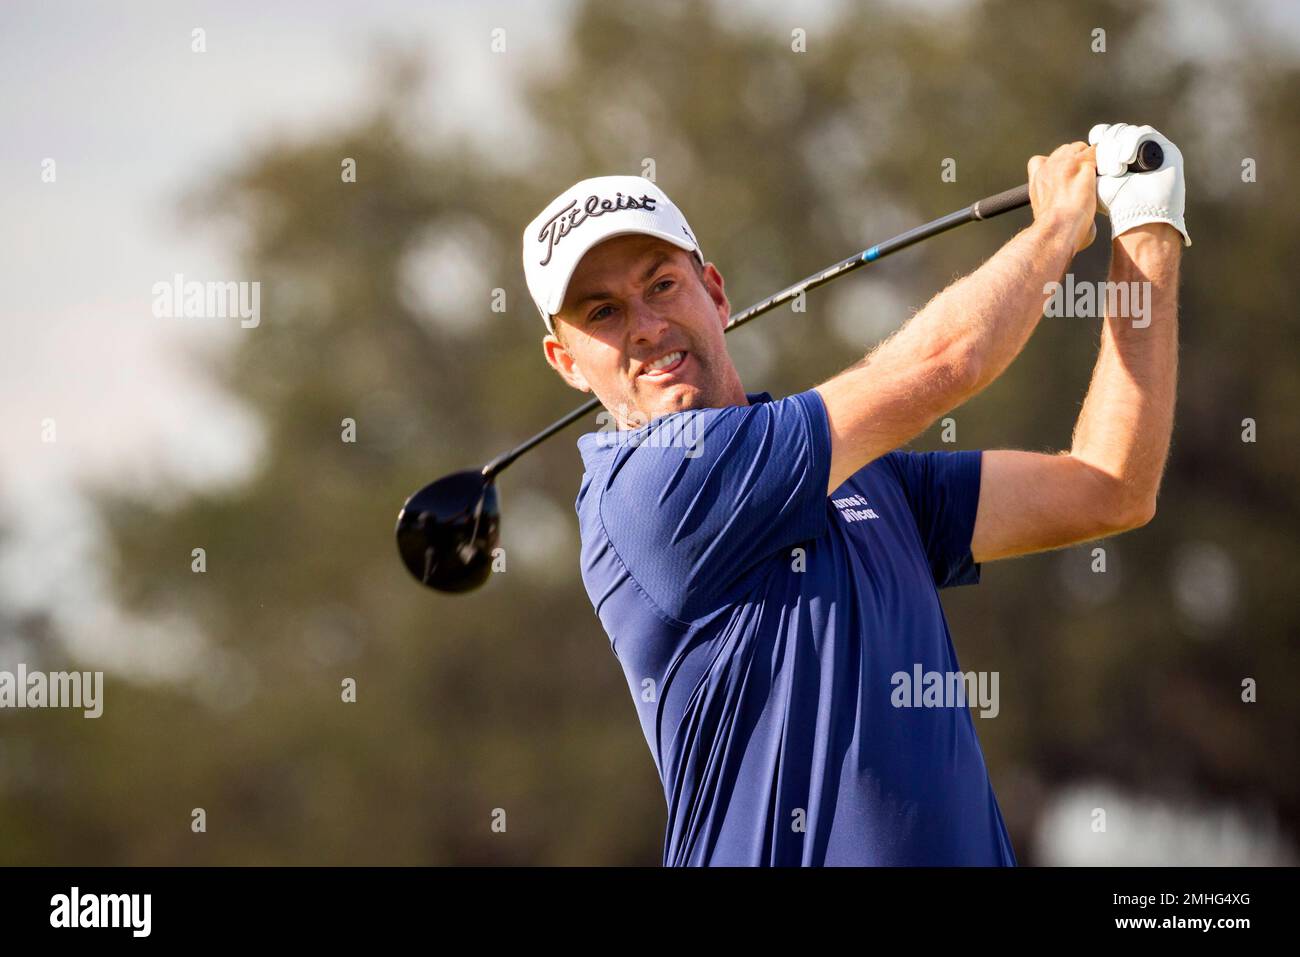 Webb Simpson hits off of the 16th tee during the third round of the RSM Classic golf tournament in St. Simons Island, Ga., Saturday, Nov., 23, 2019